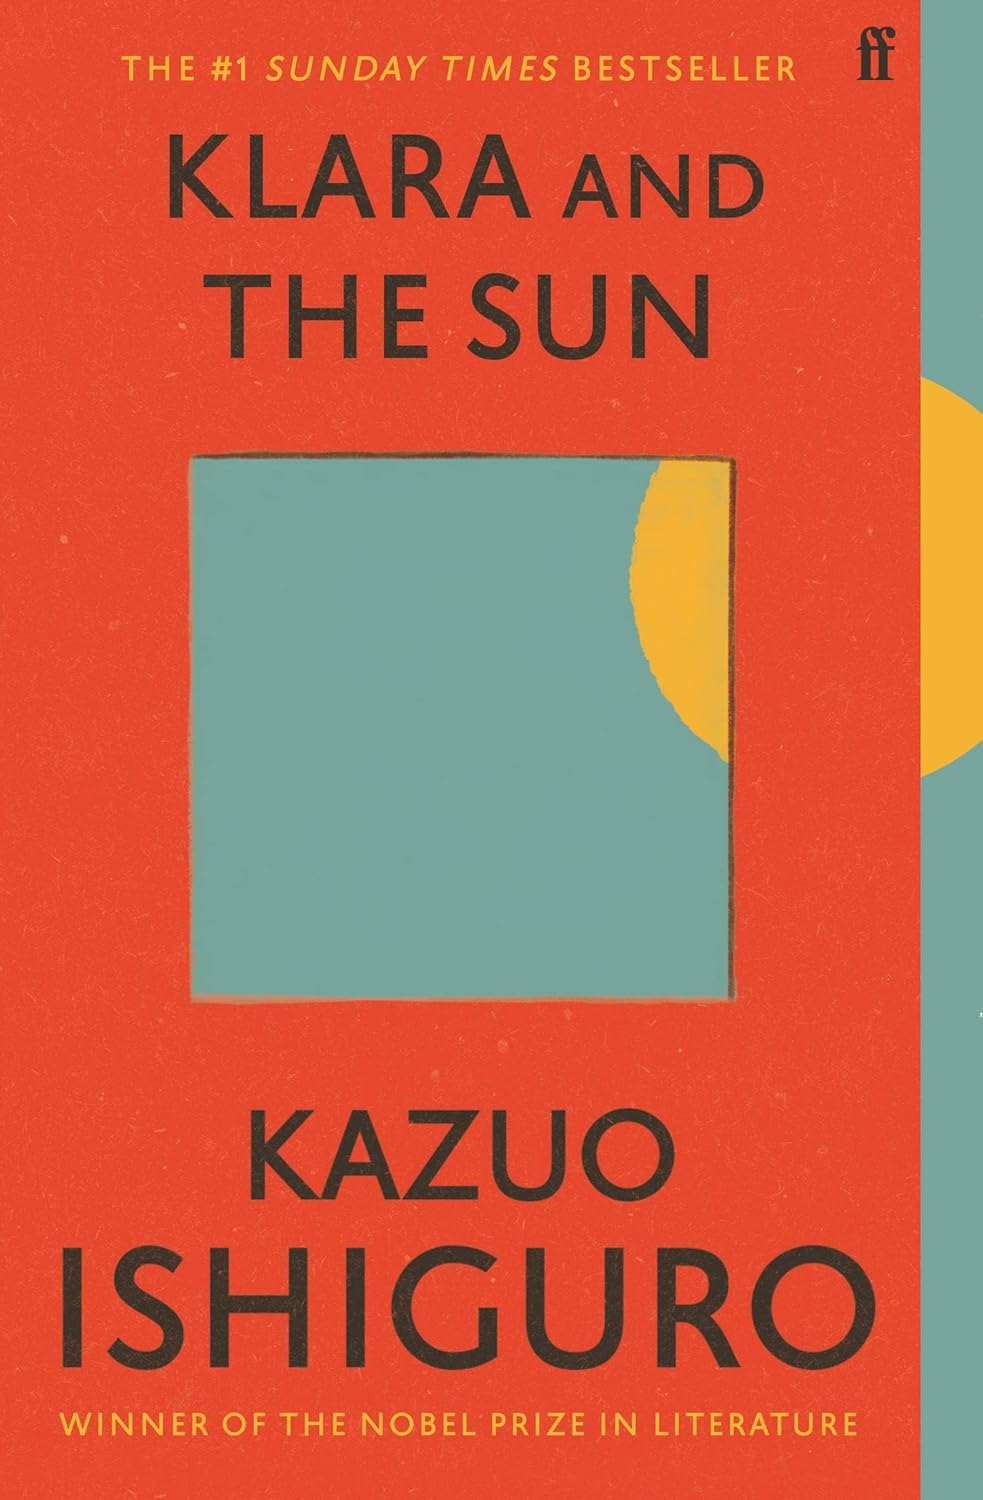 The front cover of Klara and the sun. The background is an orange red, with a square in the middle like a window, mostly blue but with the sun visible in the top right corner. This sky and sun can also be seen in a column down the right hand of the cover.